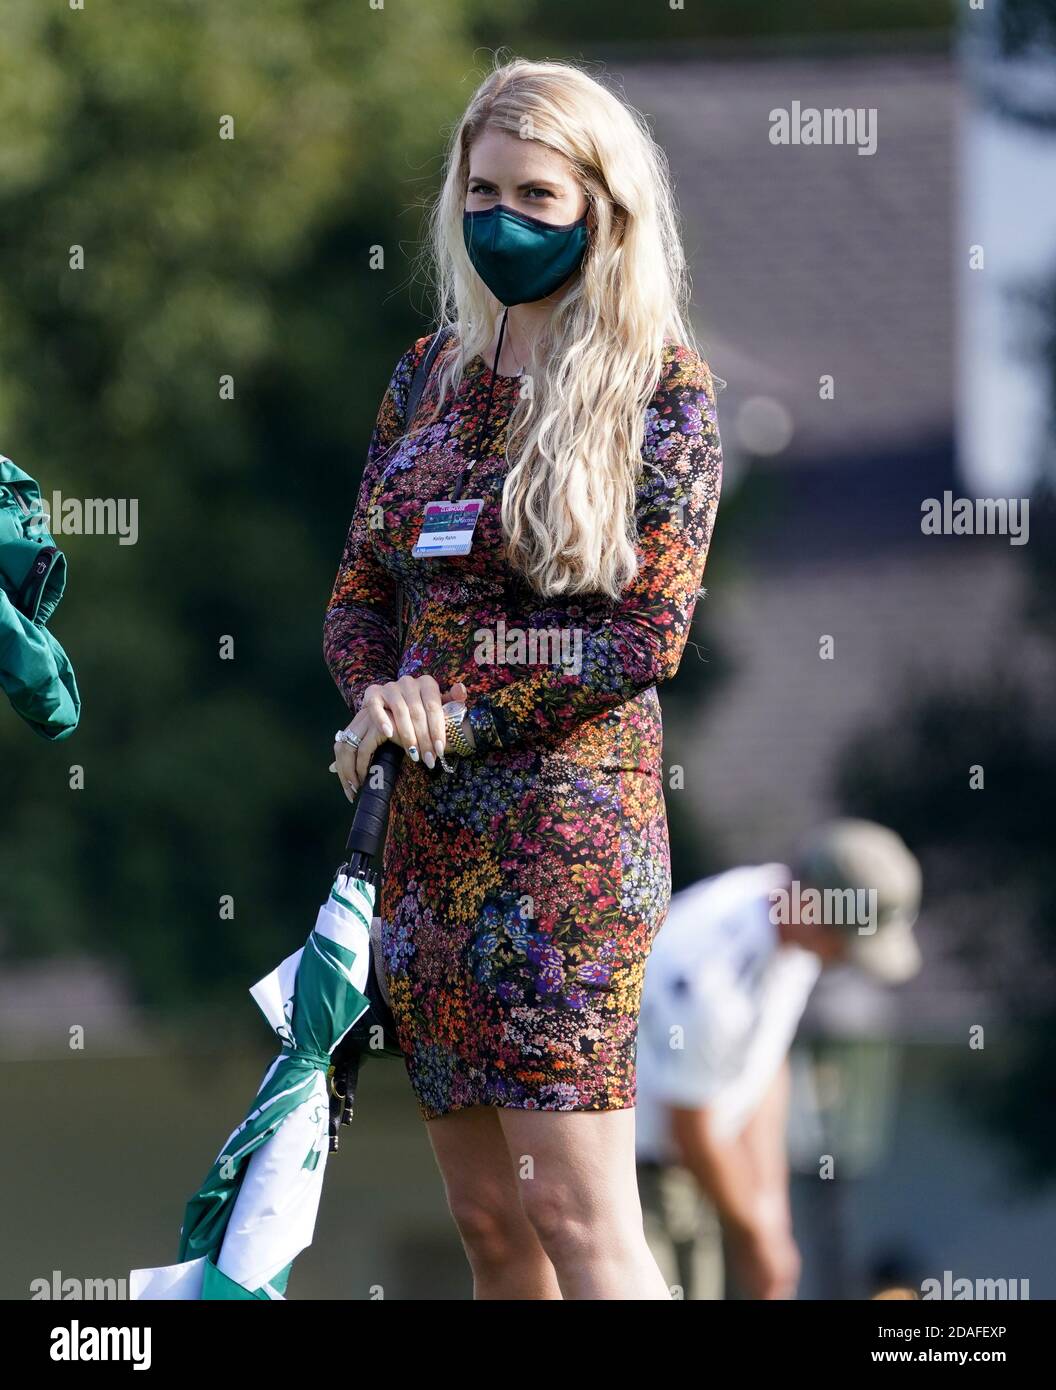 Augusta, United States. 12th Nov, 2020. Kelley Cahill watches Jon Rahm of Spain hit from the 10th tee box in the first round of the 2020 Masters golf tournament at Augusta National Golf Club in Augusta, Georgia on Thursday, November 12, 2020. Photo by Kevin Dietsch/UPI Credit: UPI/Alamy Live News Stock Photo